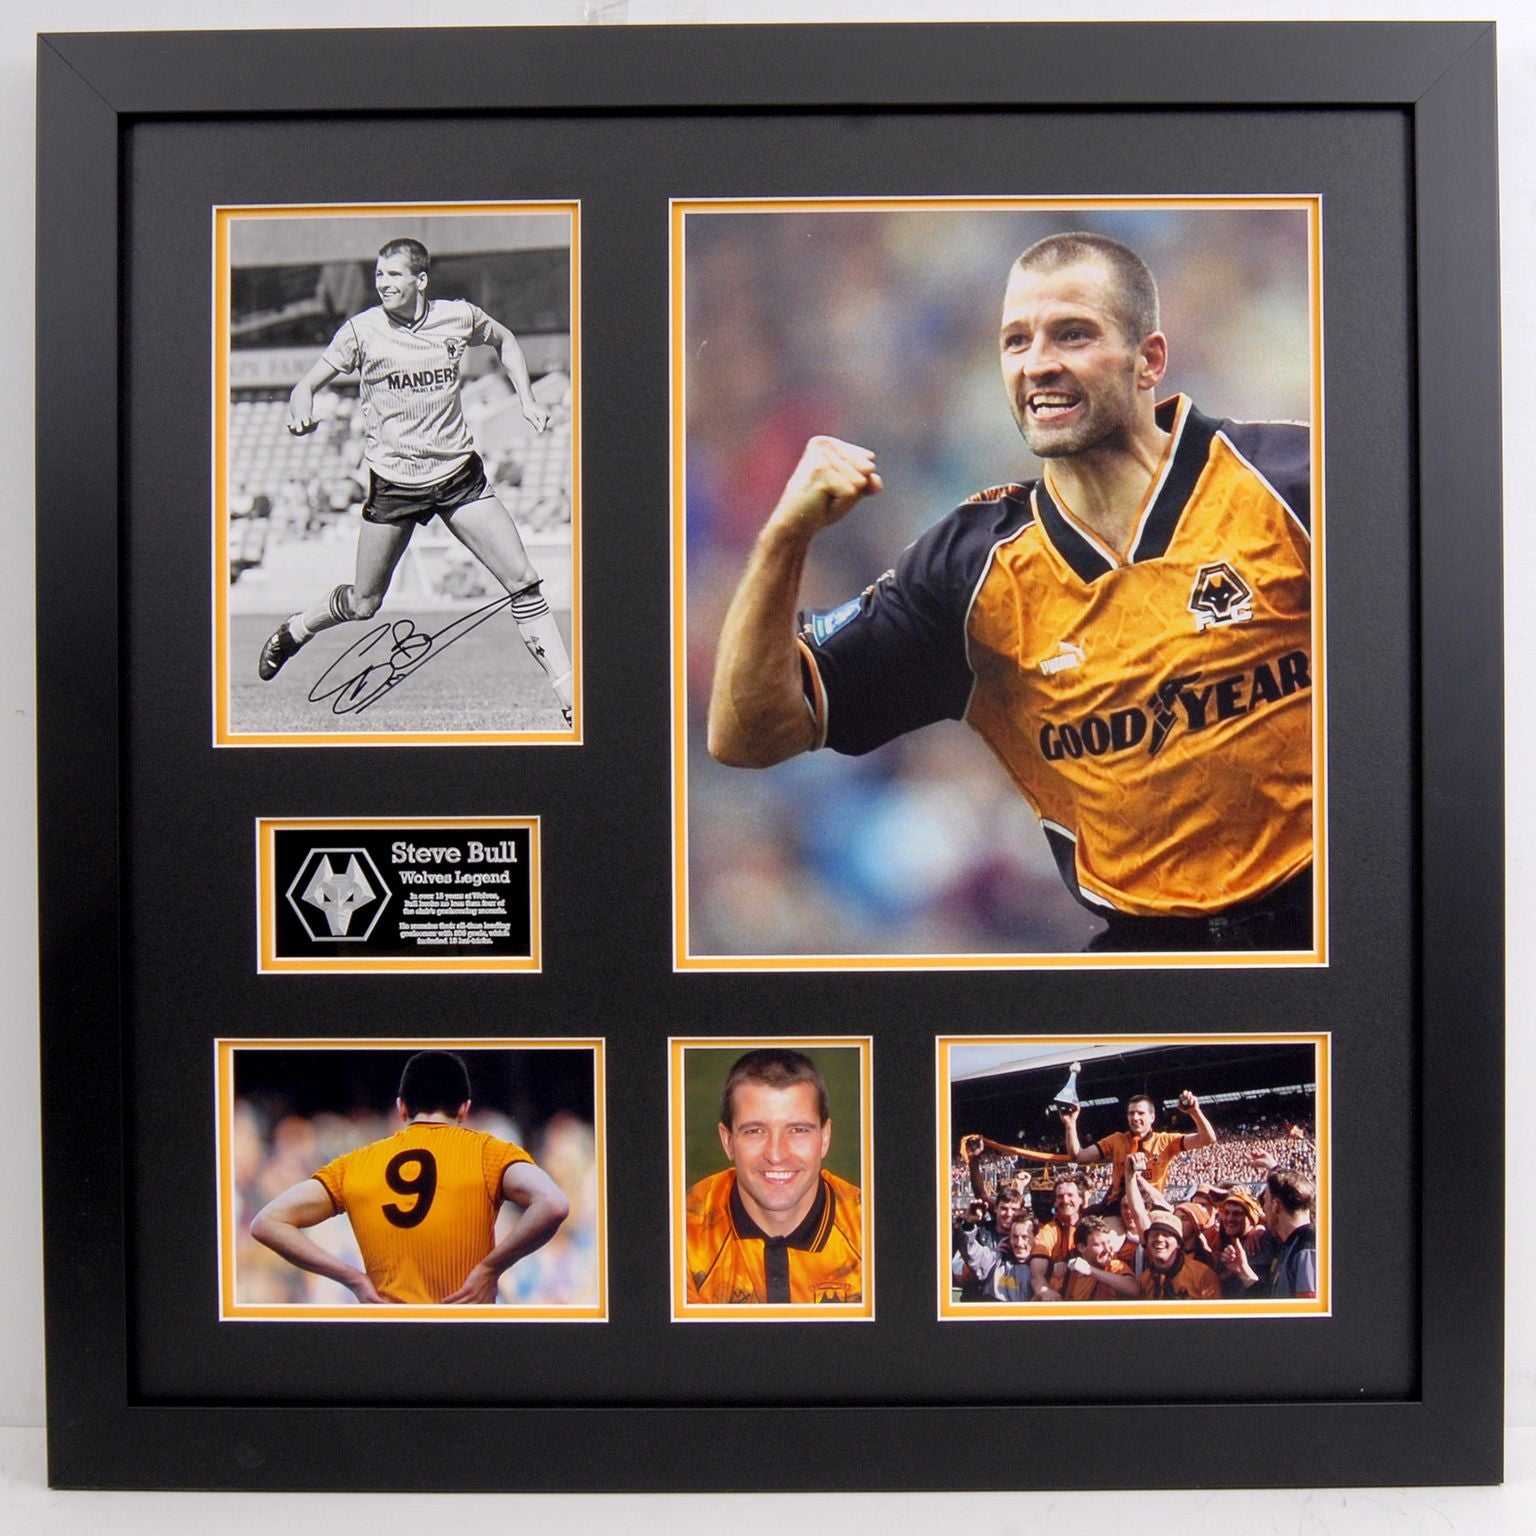 Steve Bull. Wolves Legend.  Signed Frame with career pictures and press photo.